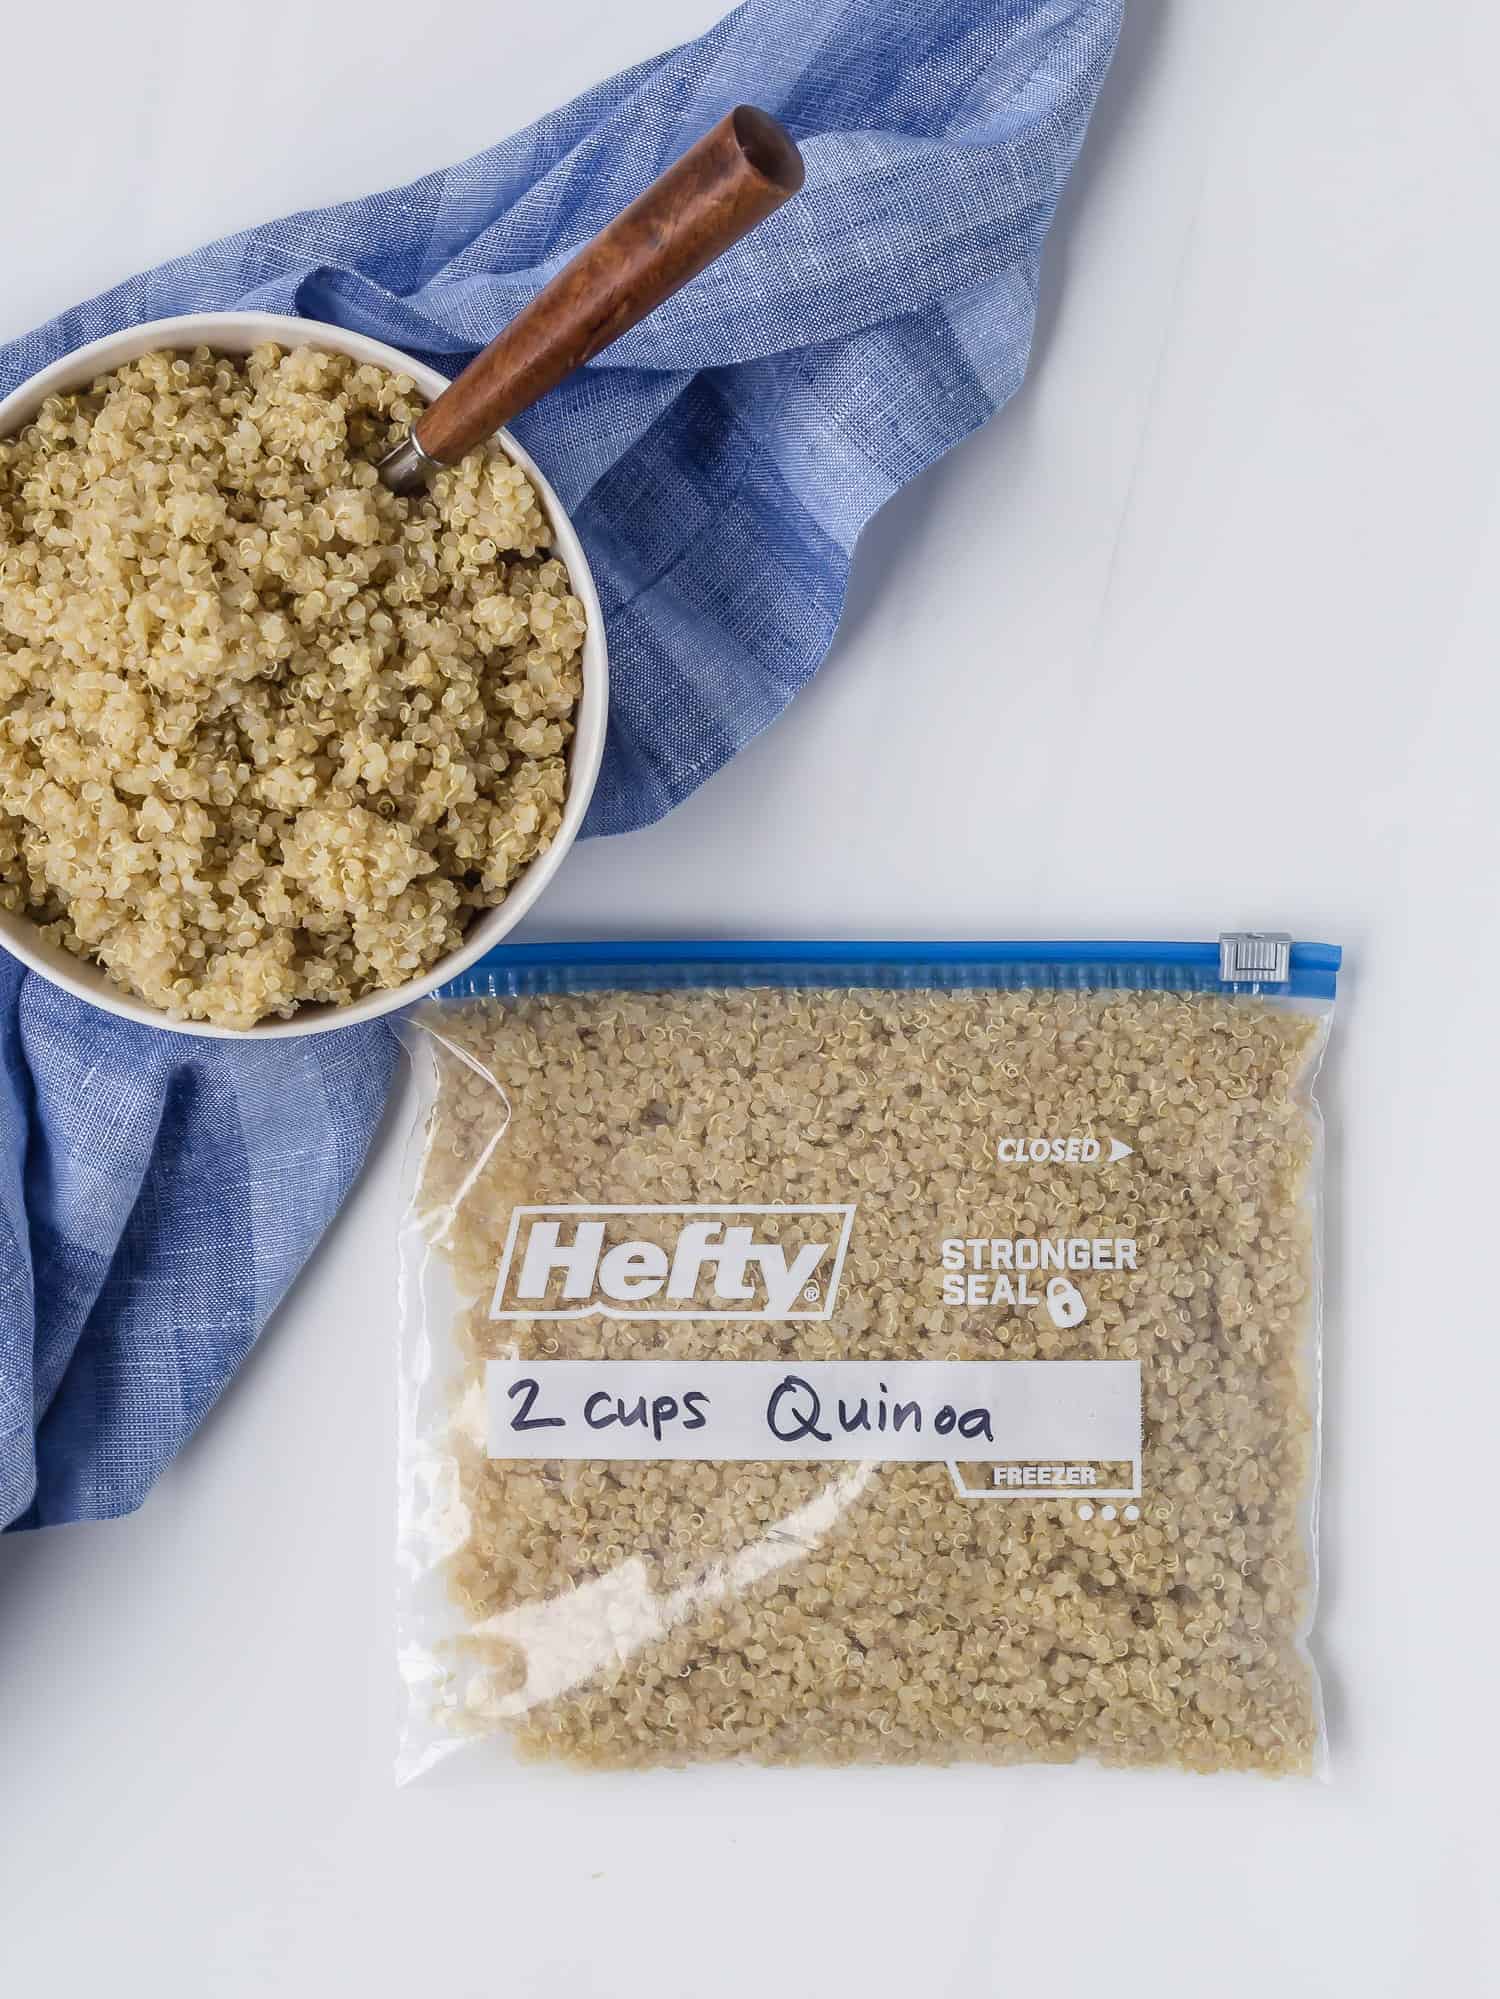 Quinoa in a zip-top bag and in a bowl.